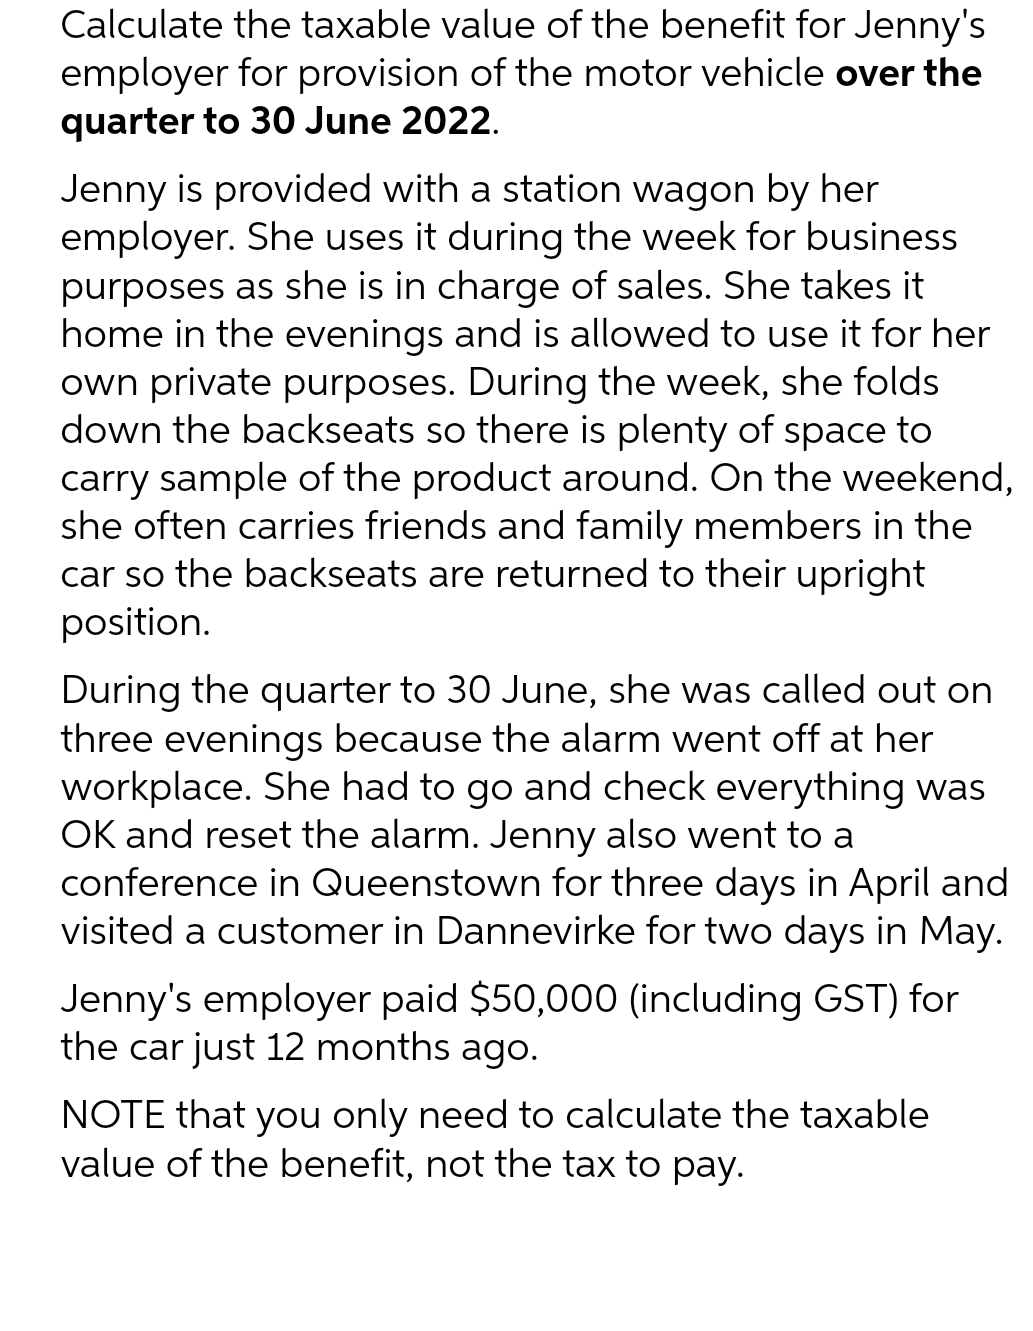 Calculate the taxable value of the benefit for Jenny's
employer for provision of the motor vehicle over the
quarter to 30 June 2022.
Jenny is provided with a station wagon by her
employer. She uses it during the week for business
purposes as she is in charge of sales. She takes it
home in the evenings and is allowed to use it for her
own private purposes. During the week, she folds
down the backseats so there is plenty of space to
carry sample of the product around. On the weekend,
she often carries friends and family members in the
car so the backseats are returned to their upright
position.
During the quarter to 30 June, she was called out on
three evenings because the alarm went off at her
workplace. She had to go and check everything was
OK and reset the alarm. Jenny also went to a
conference in Queenstown for three days in April and
visited a customer in Dannevirke for two days in May.
Jenny's employer paid $50,000 (including GST) for
the car just 12 months ago.
NOTE that you only need to calculate the taxable
value of the benefit, not the tax to pay.